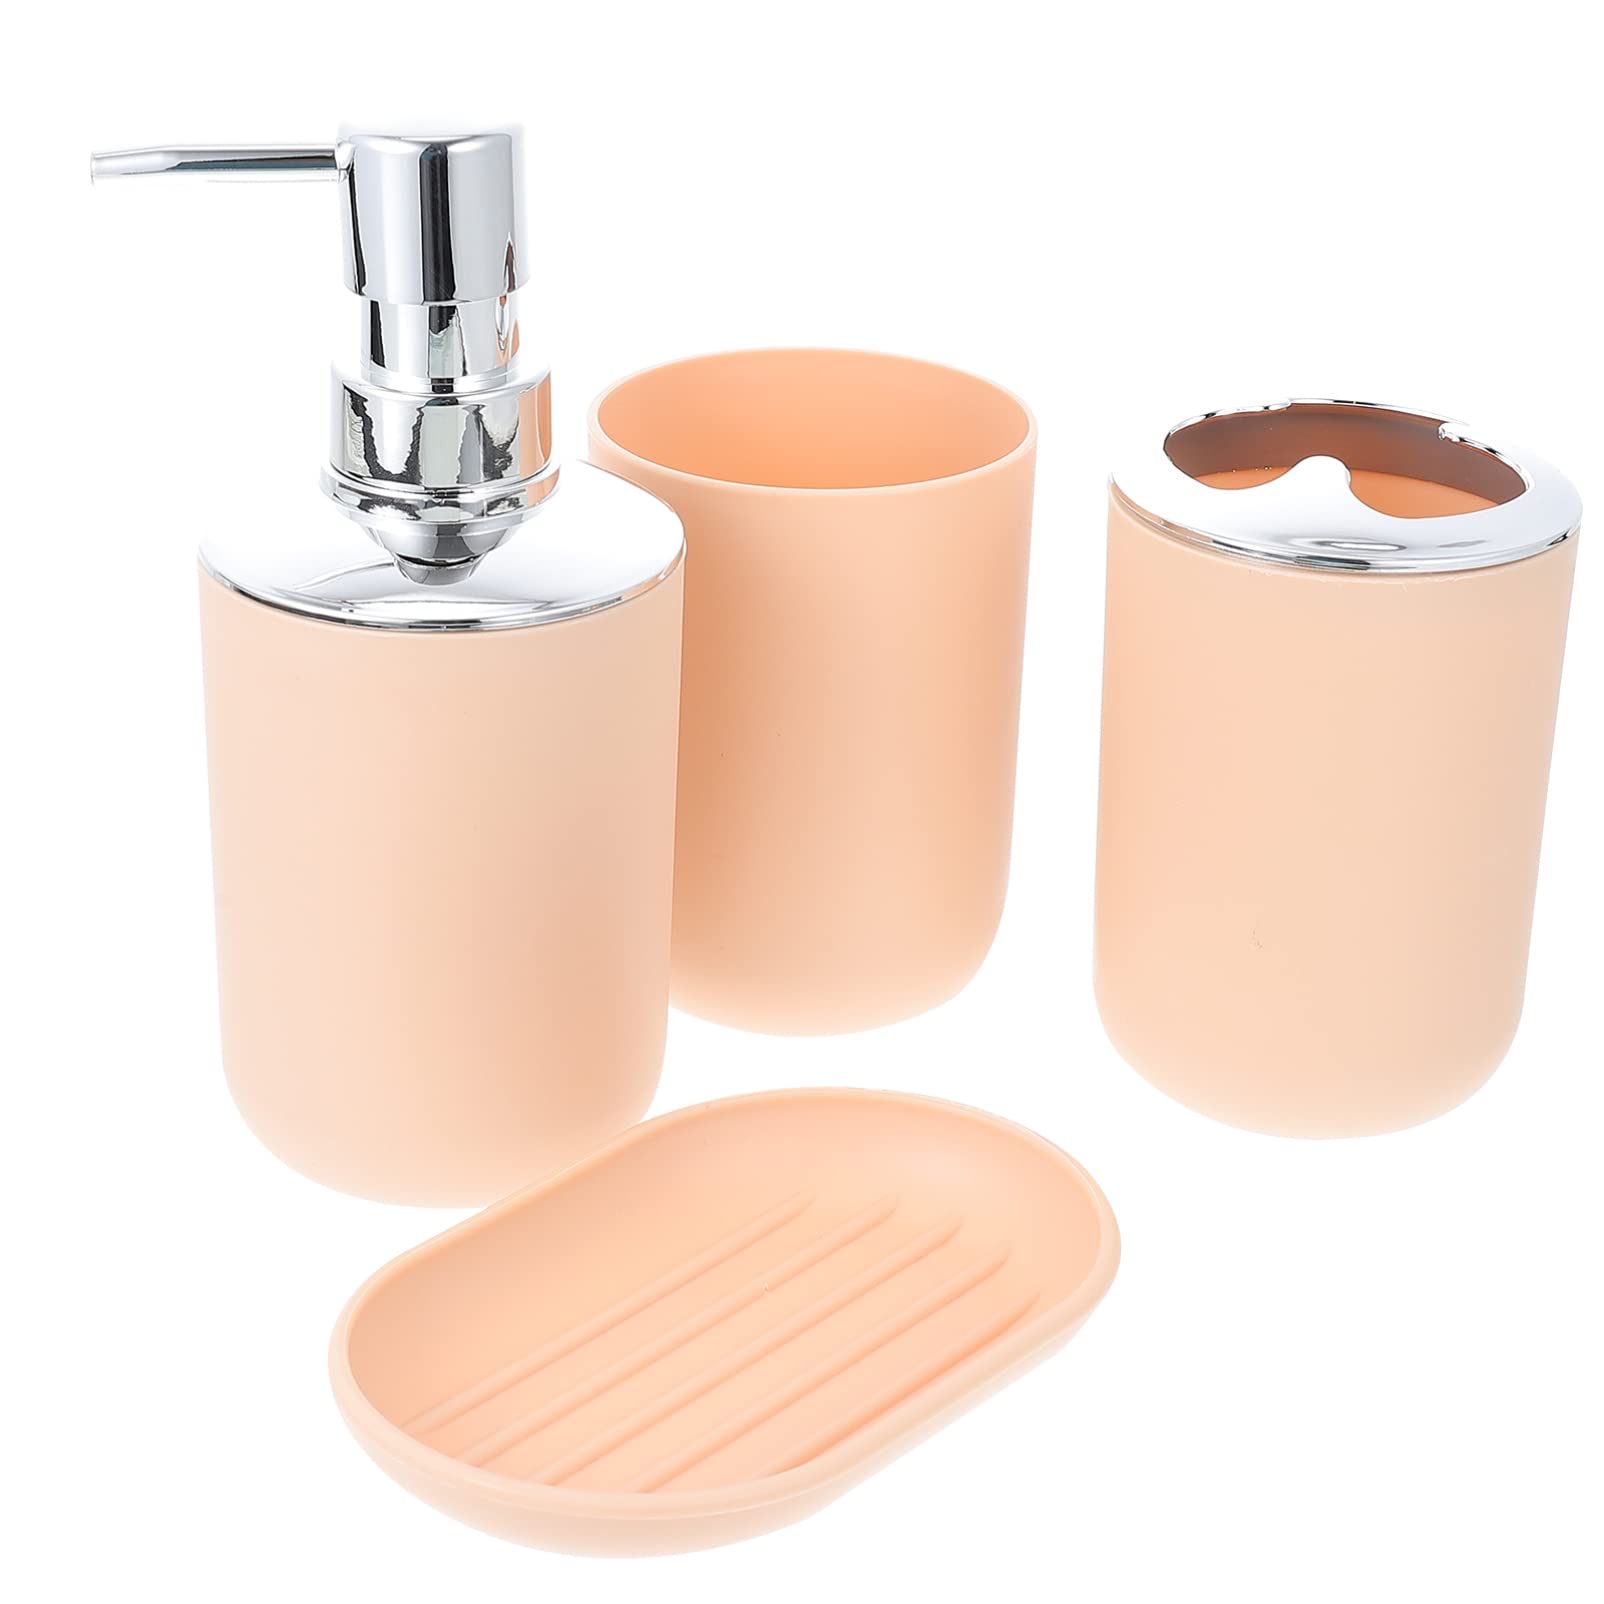 1 Set Bathroom Set Foam Hand Soap Dispenser Toothbrush Holder Cup White Bathroom Accessories Black Decor Hand Soap Container White Decor Dish Soap Dressing Table Plating